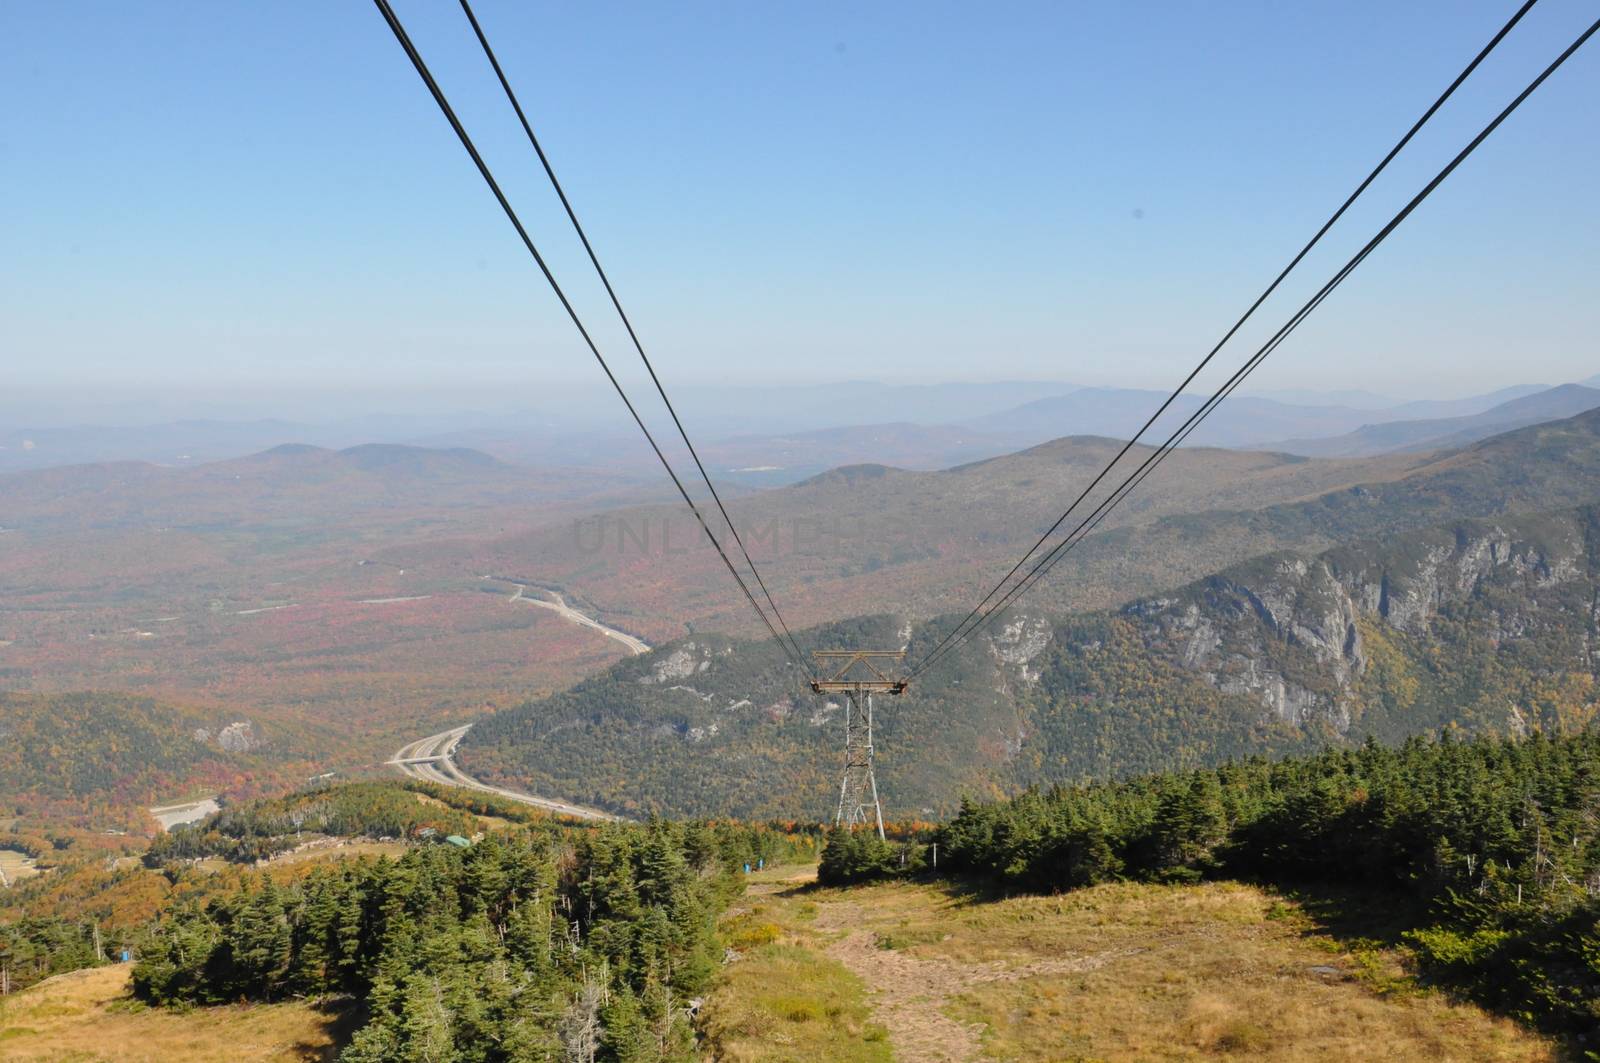 Fall Colors view from Cannon Mountain Aerial Tramway at the White Mountain National Forest in New Hampshire by sainaniritu